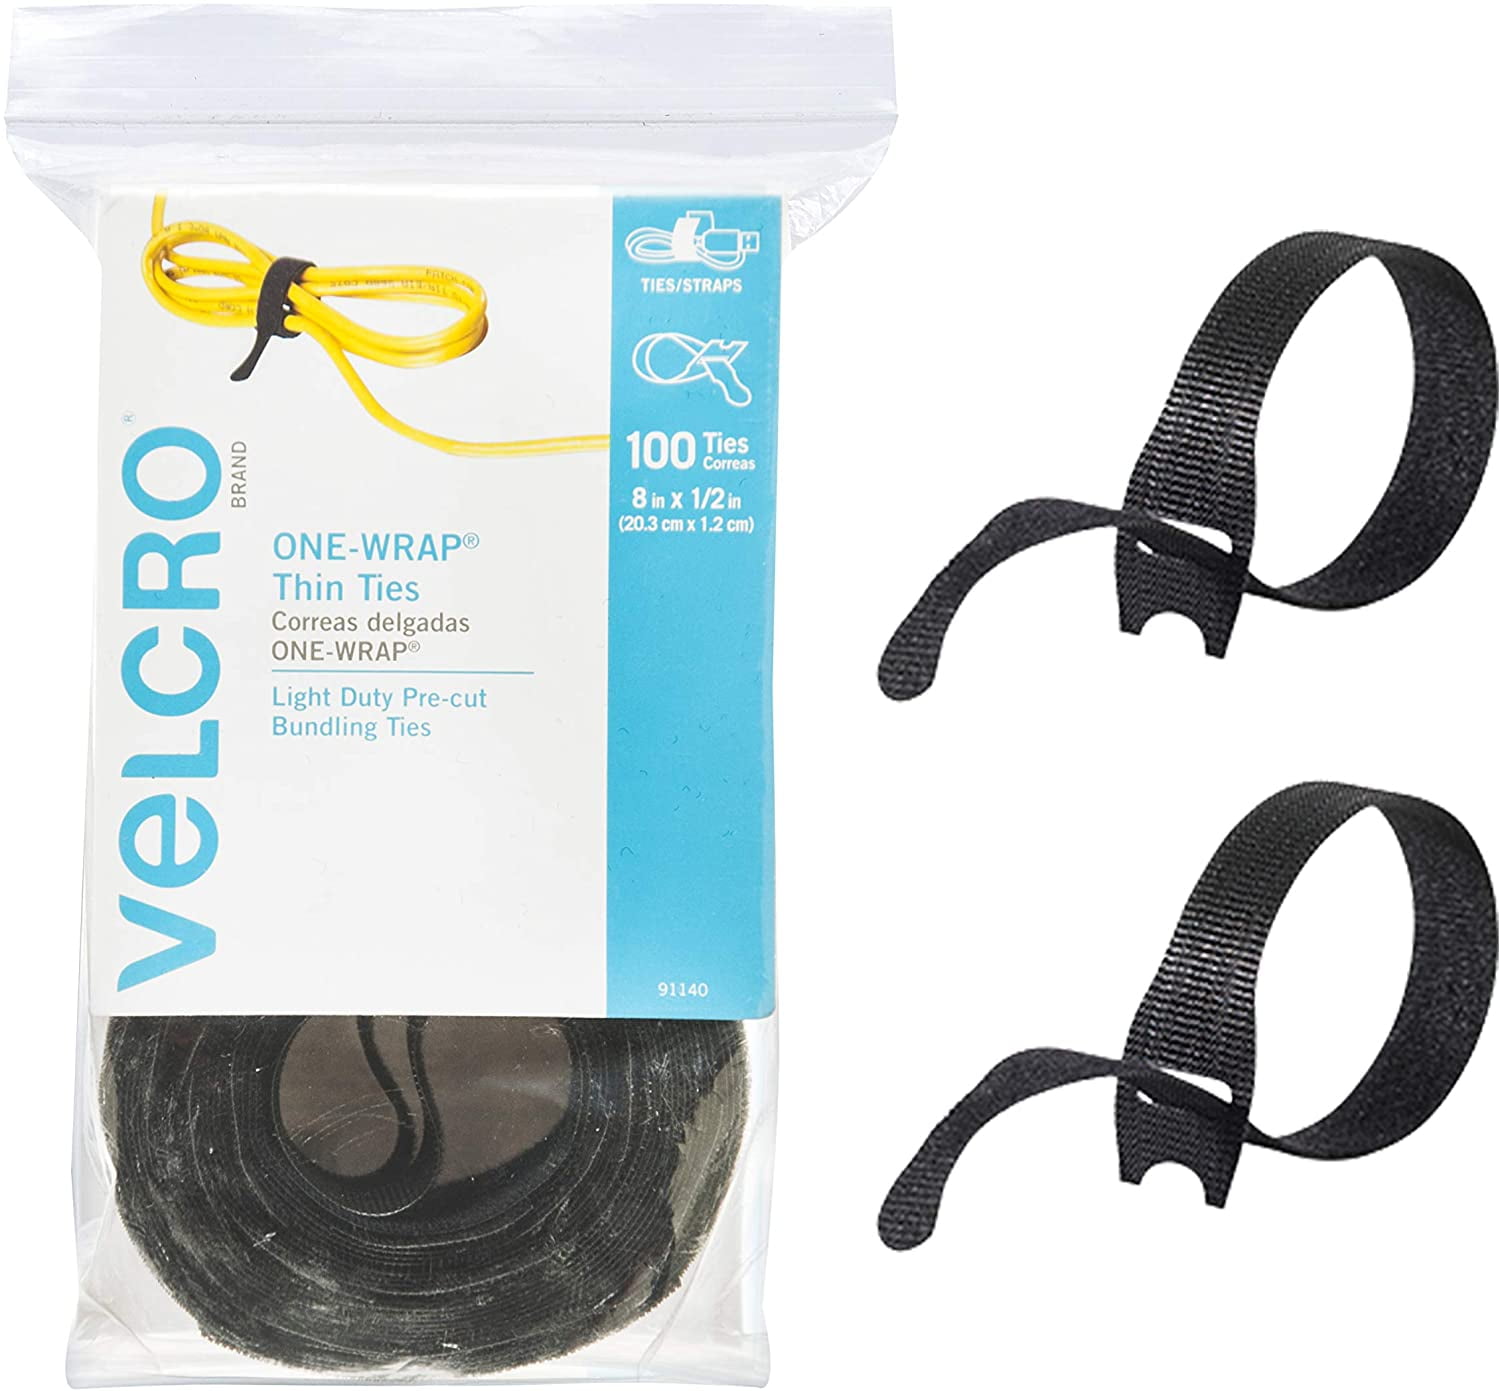 VELCRO® Brand ONE-WRAP® Straps UL Rated 3/4 X 8 25, 50 or 100 ct pucks